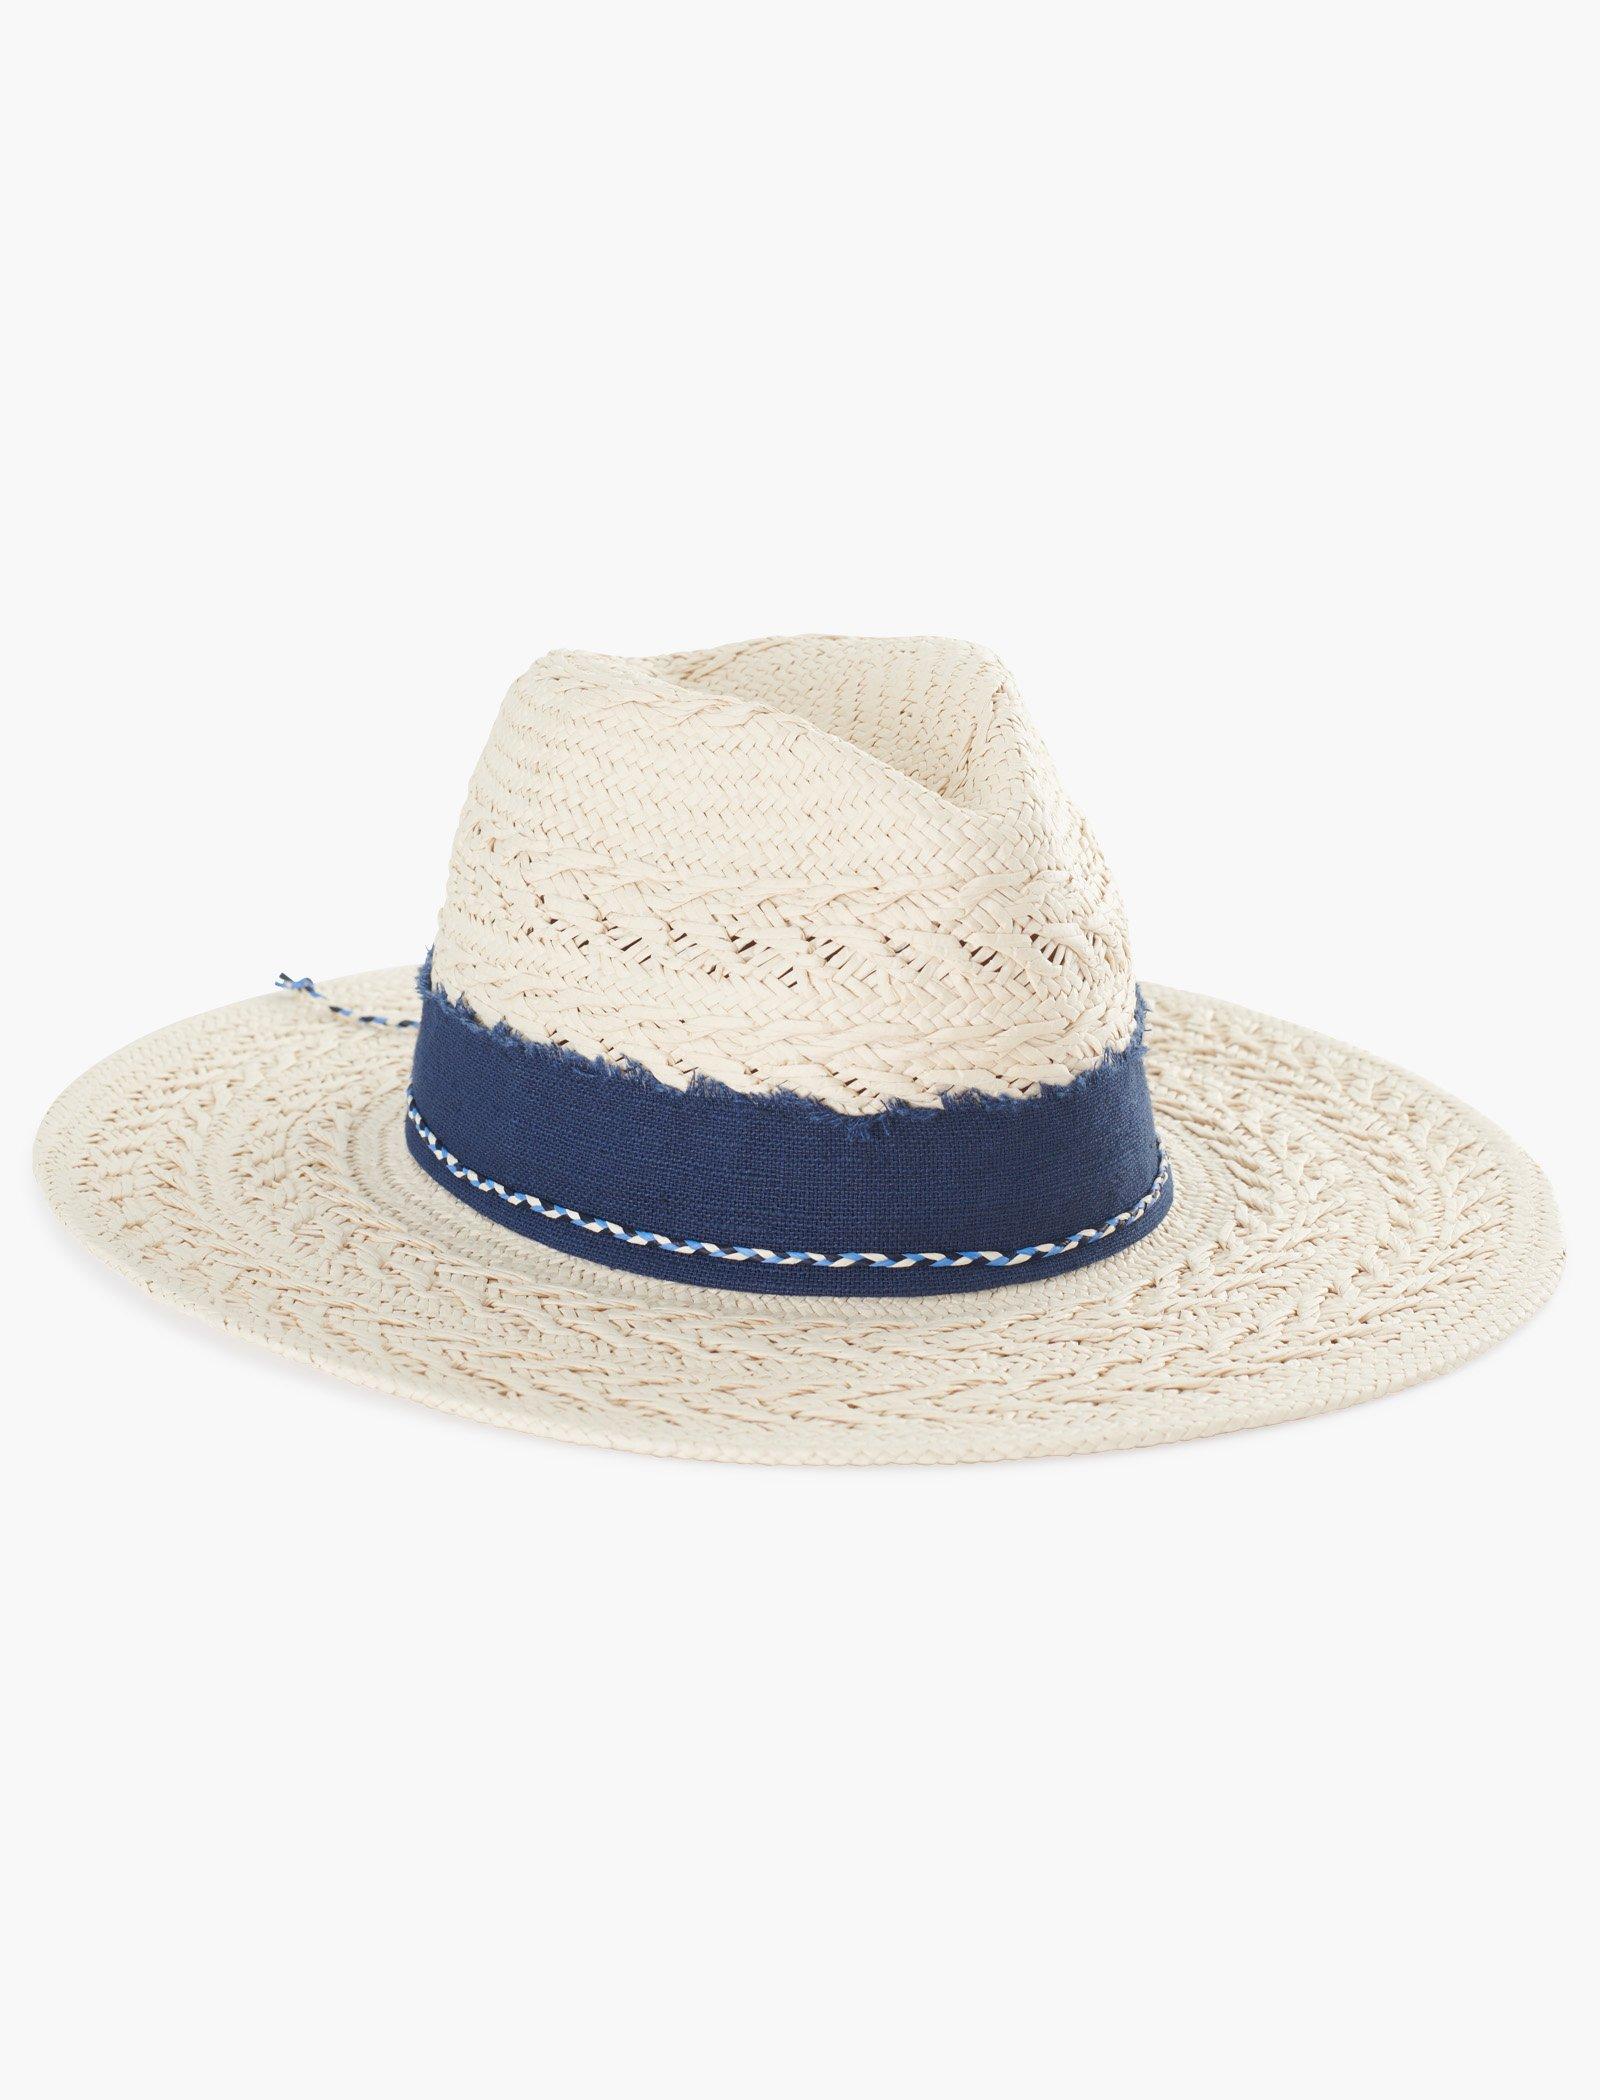 Women's Accessories on Sale | Lucky Brand